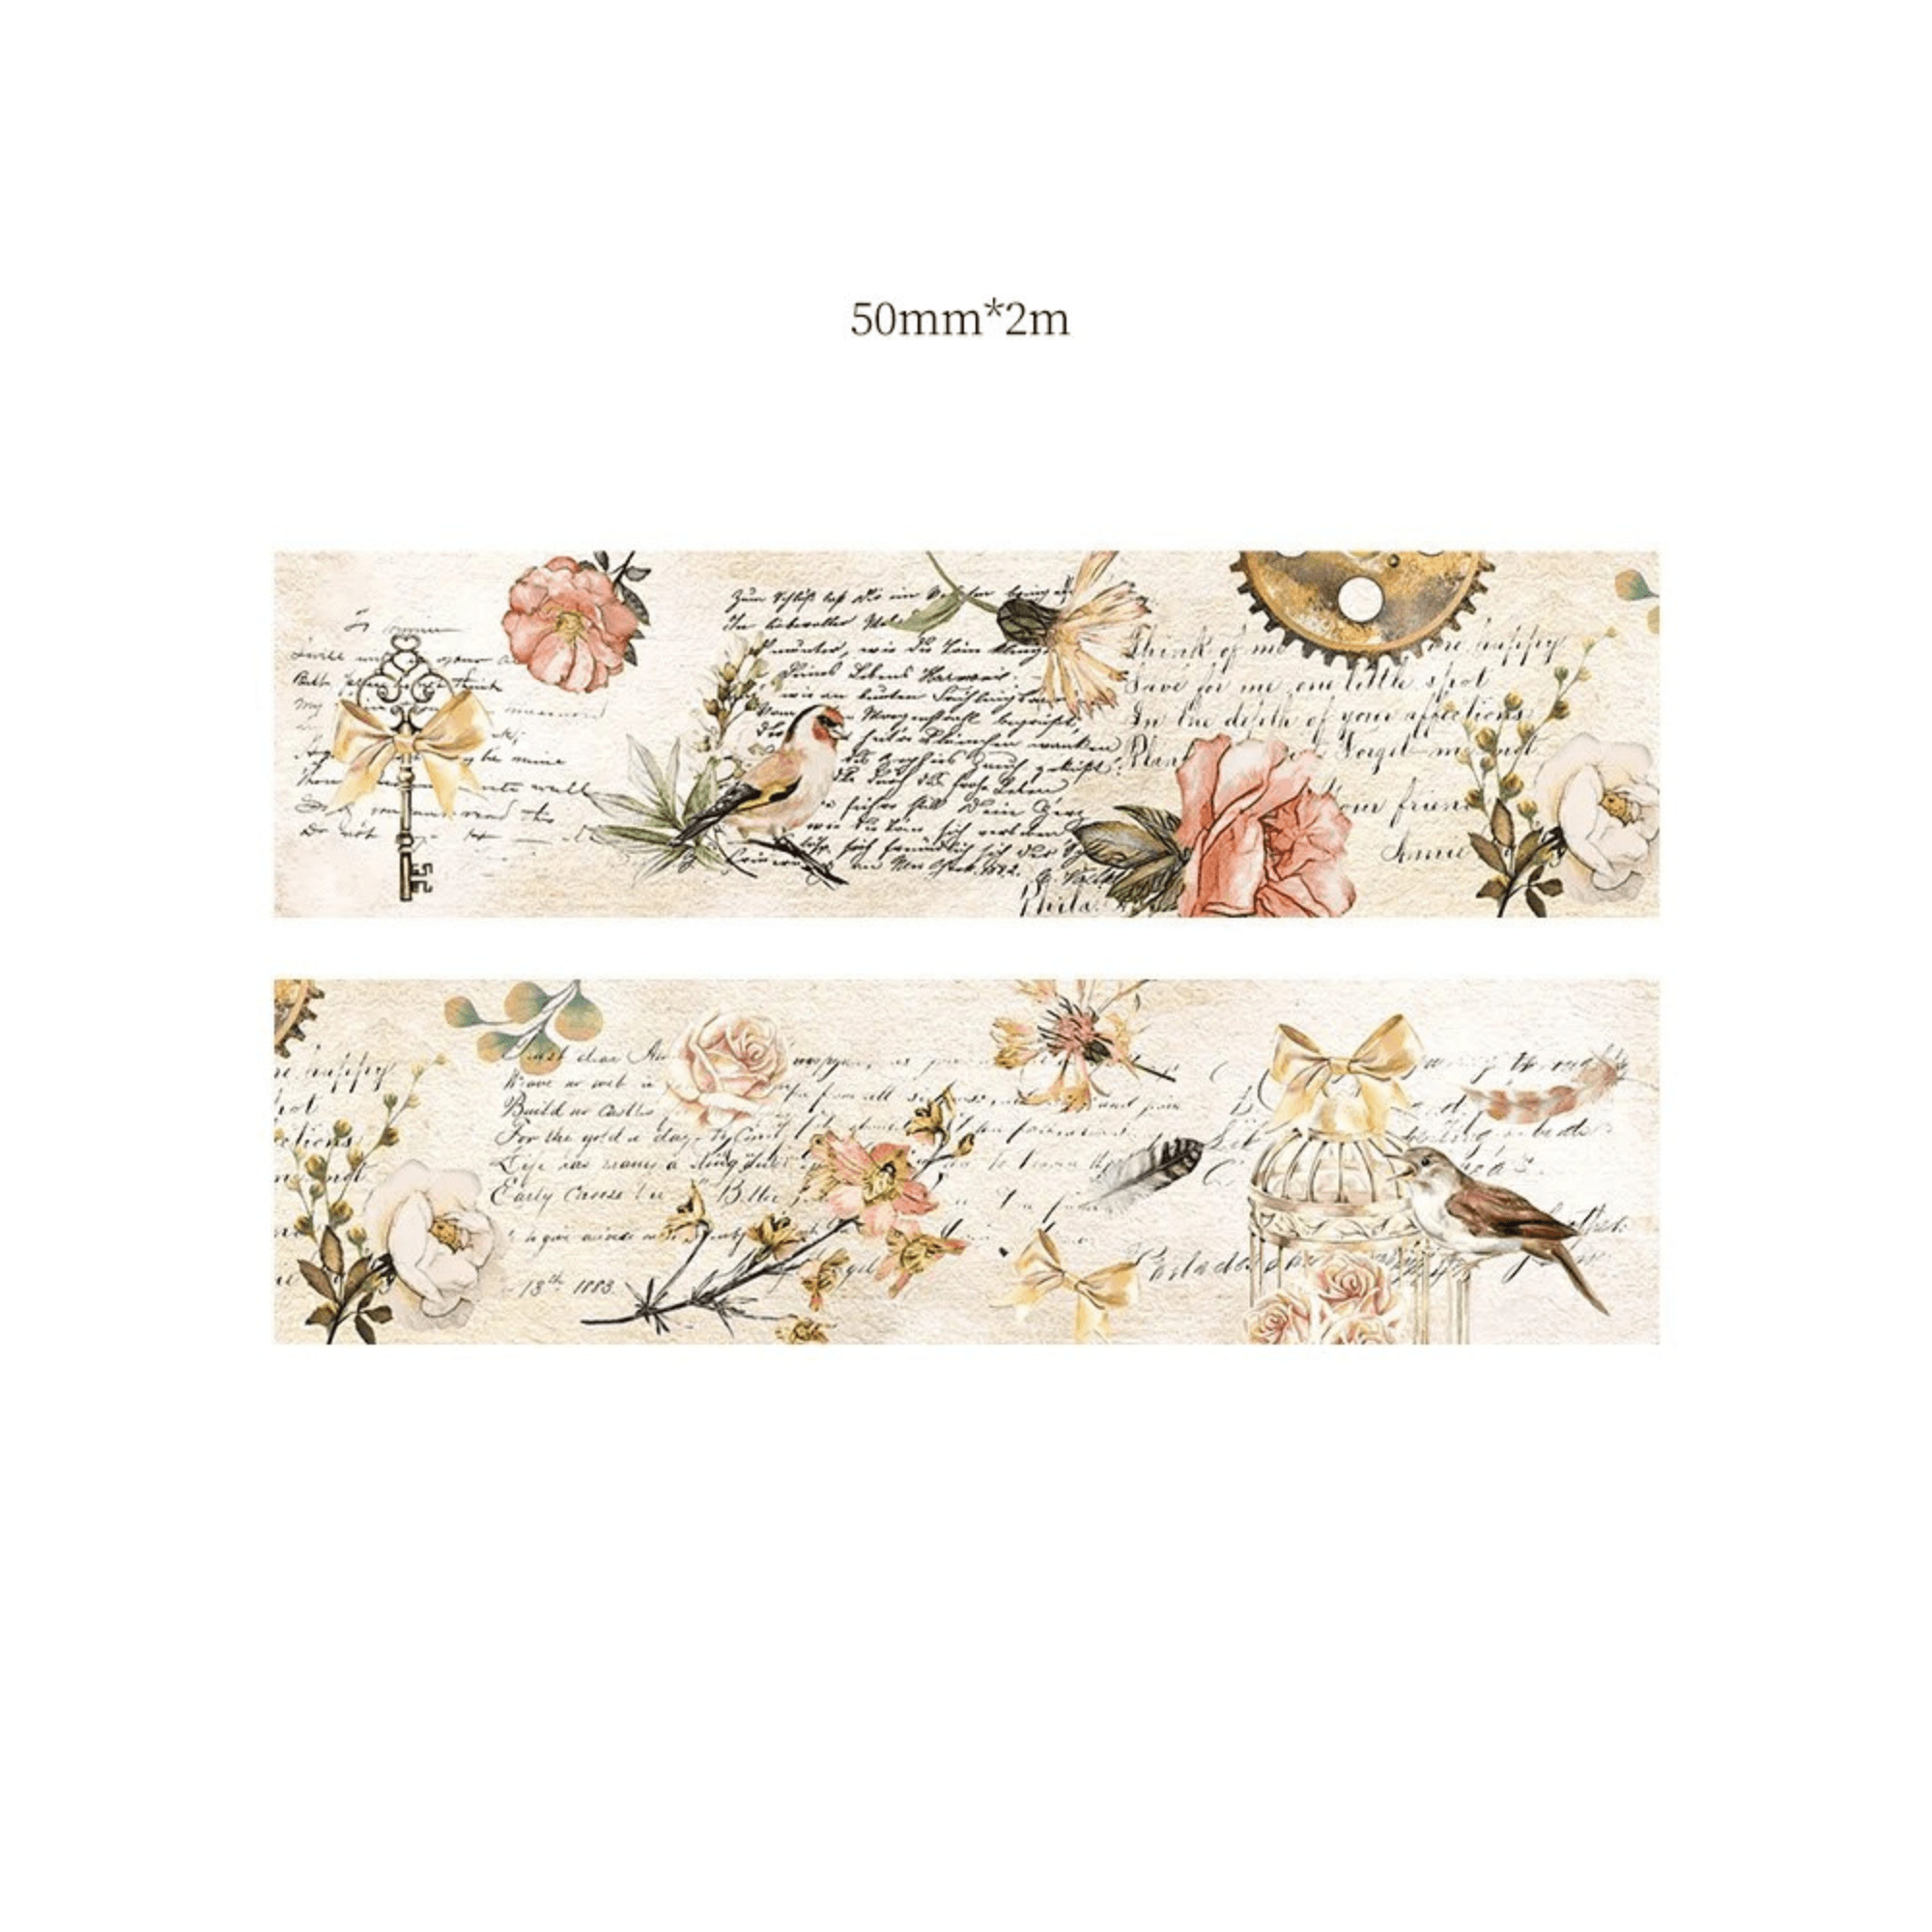 PAPERWRLD - Handwritten Letter and Flower Adhesive Washi Tape